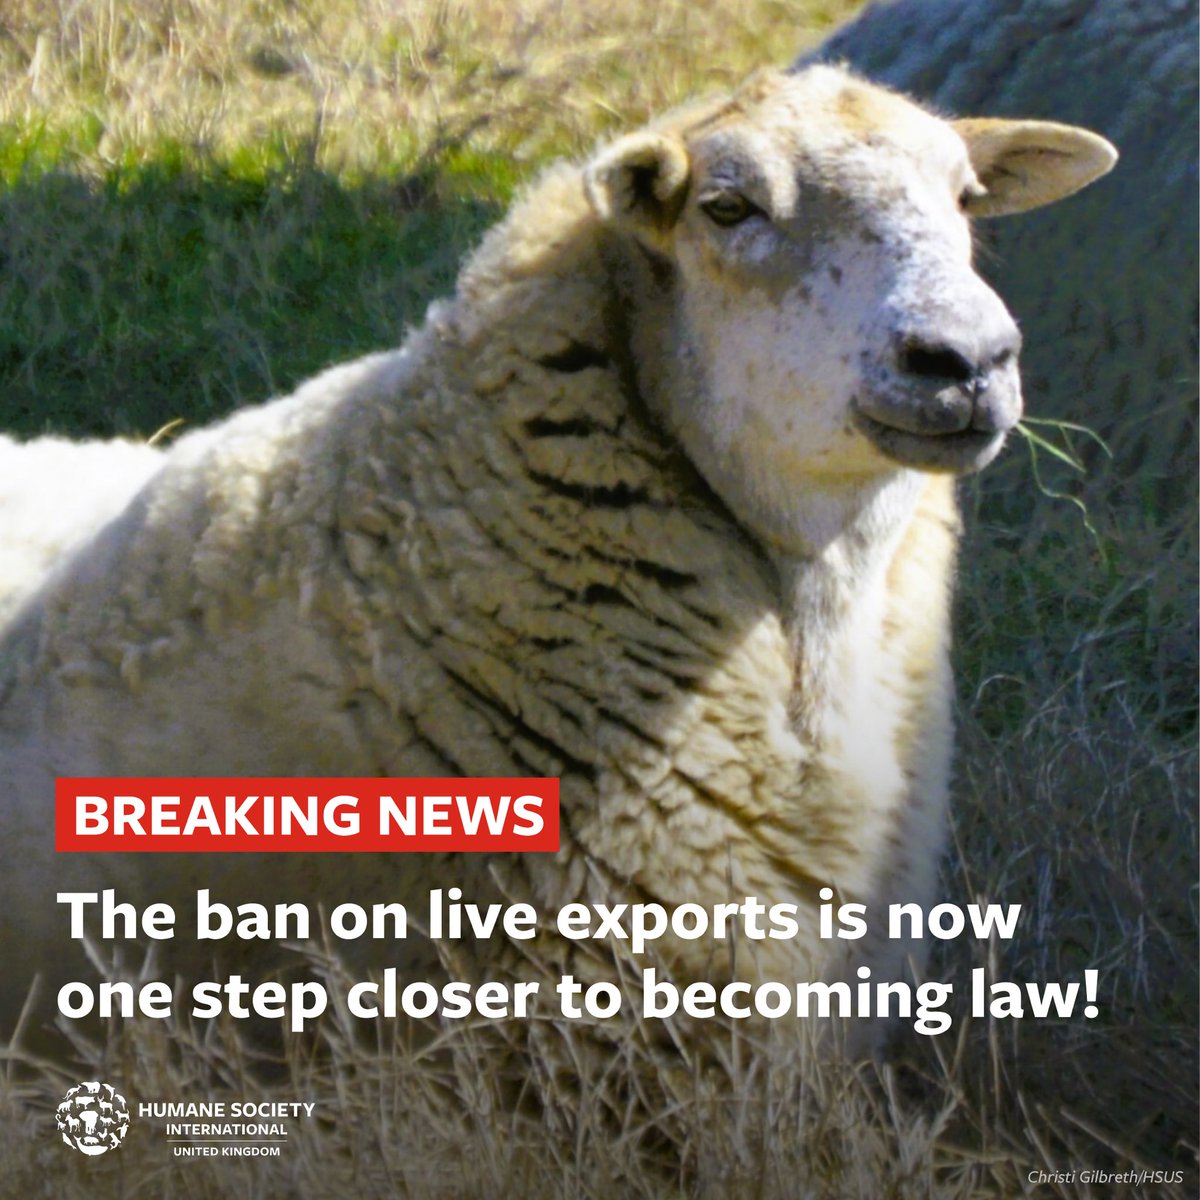 PROGRESS! The Livestock Exports Bill has just passed Report stage in @UKHouseofLords! Its final stage is expected 14th May, when - after decades of campaigners fighting this appalling suffering in both ports and Parliament - the UK will finally #BanLiveExports!